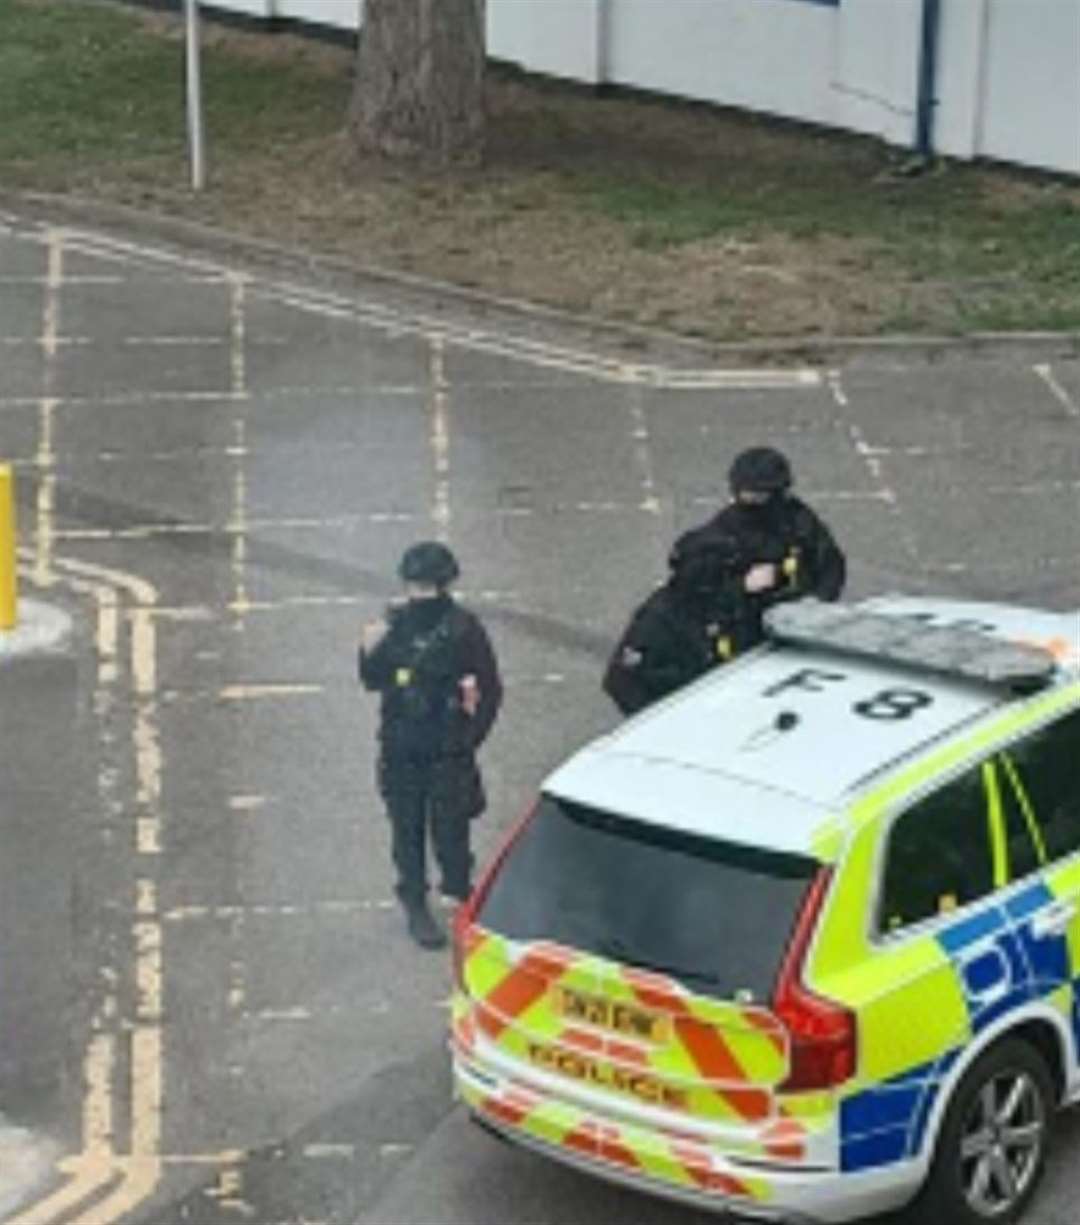 Armed officers were seen in the Sheppey Leisure Complex